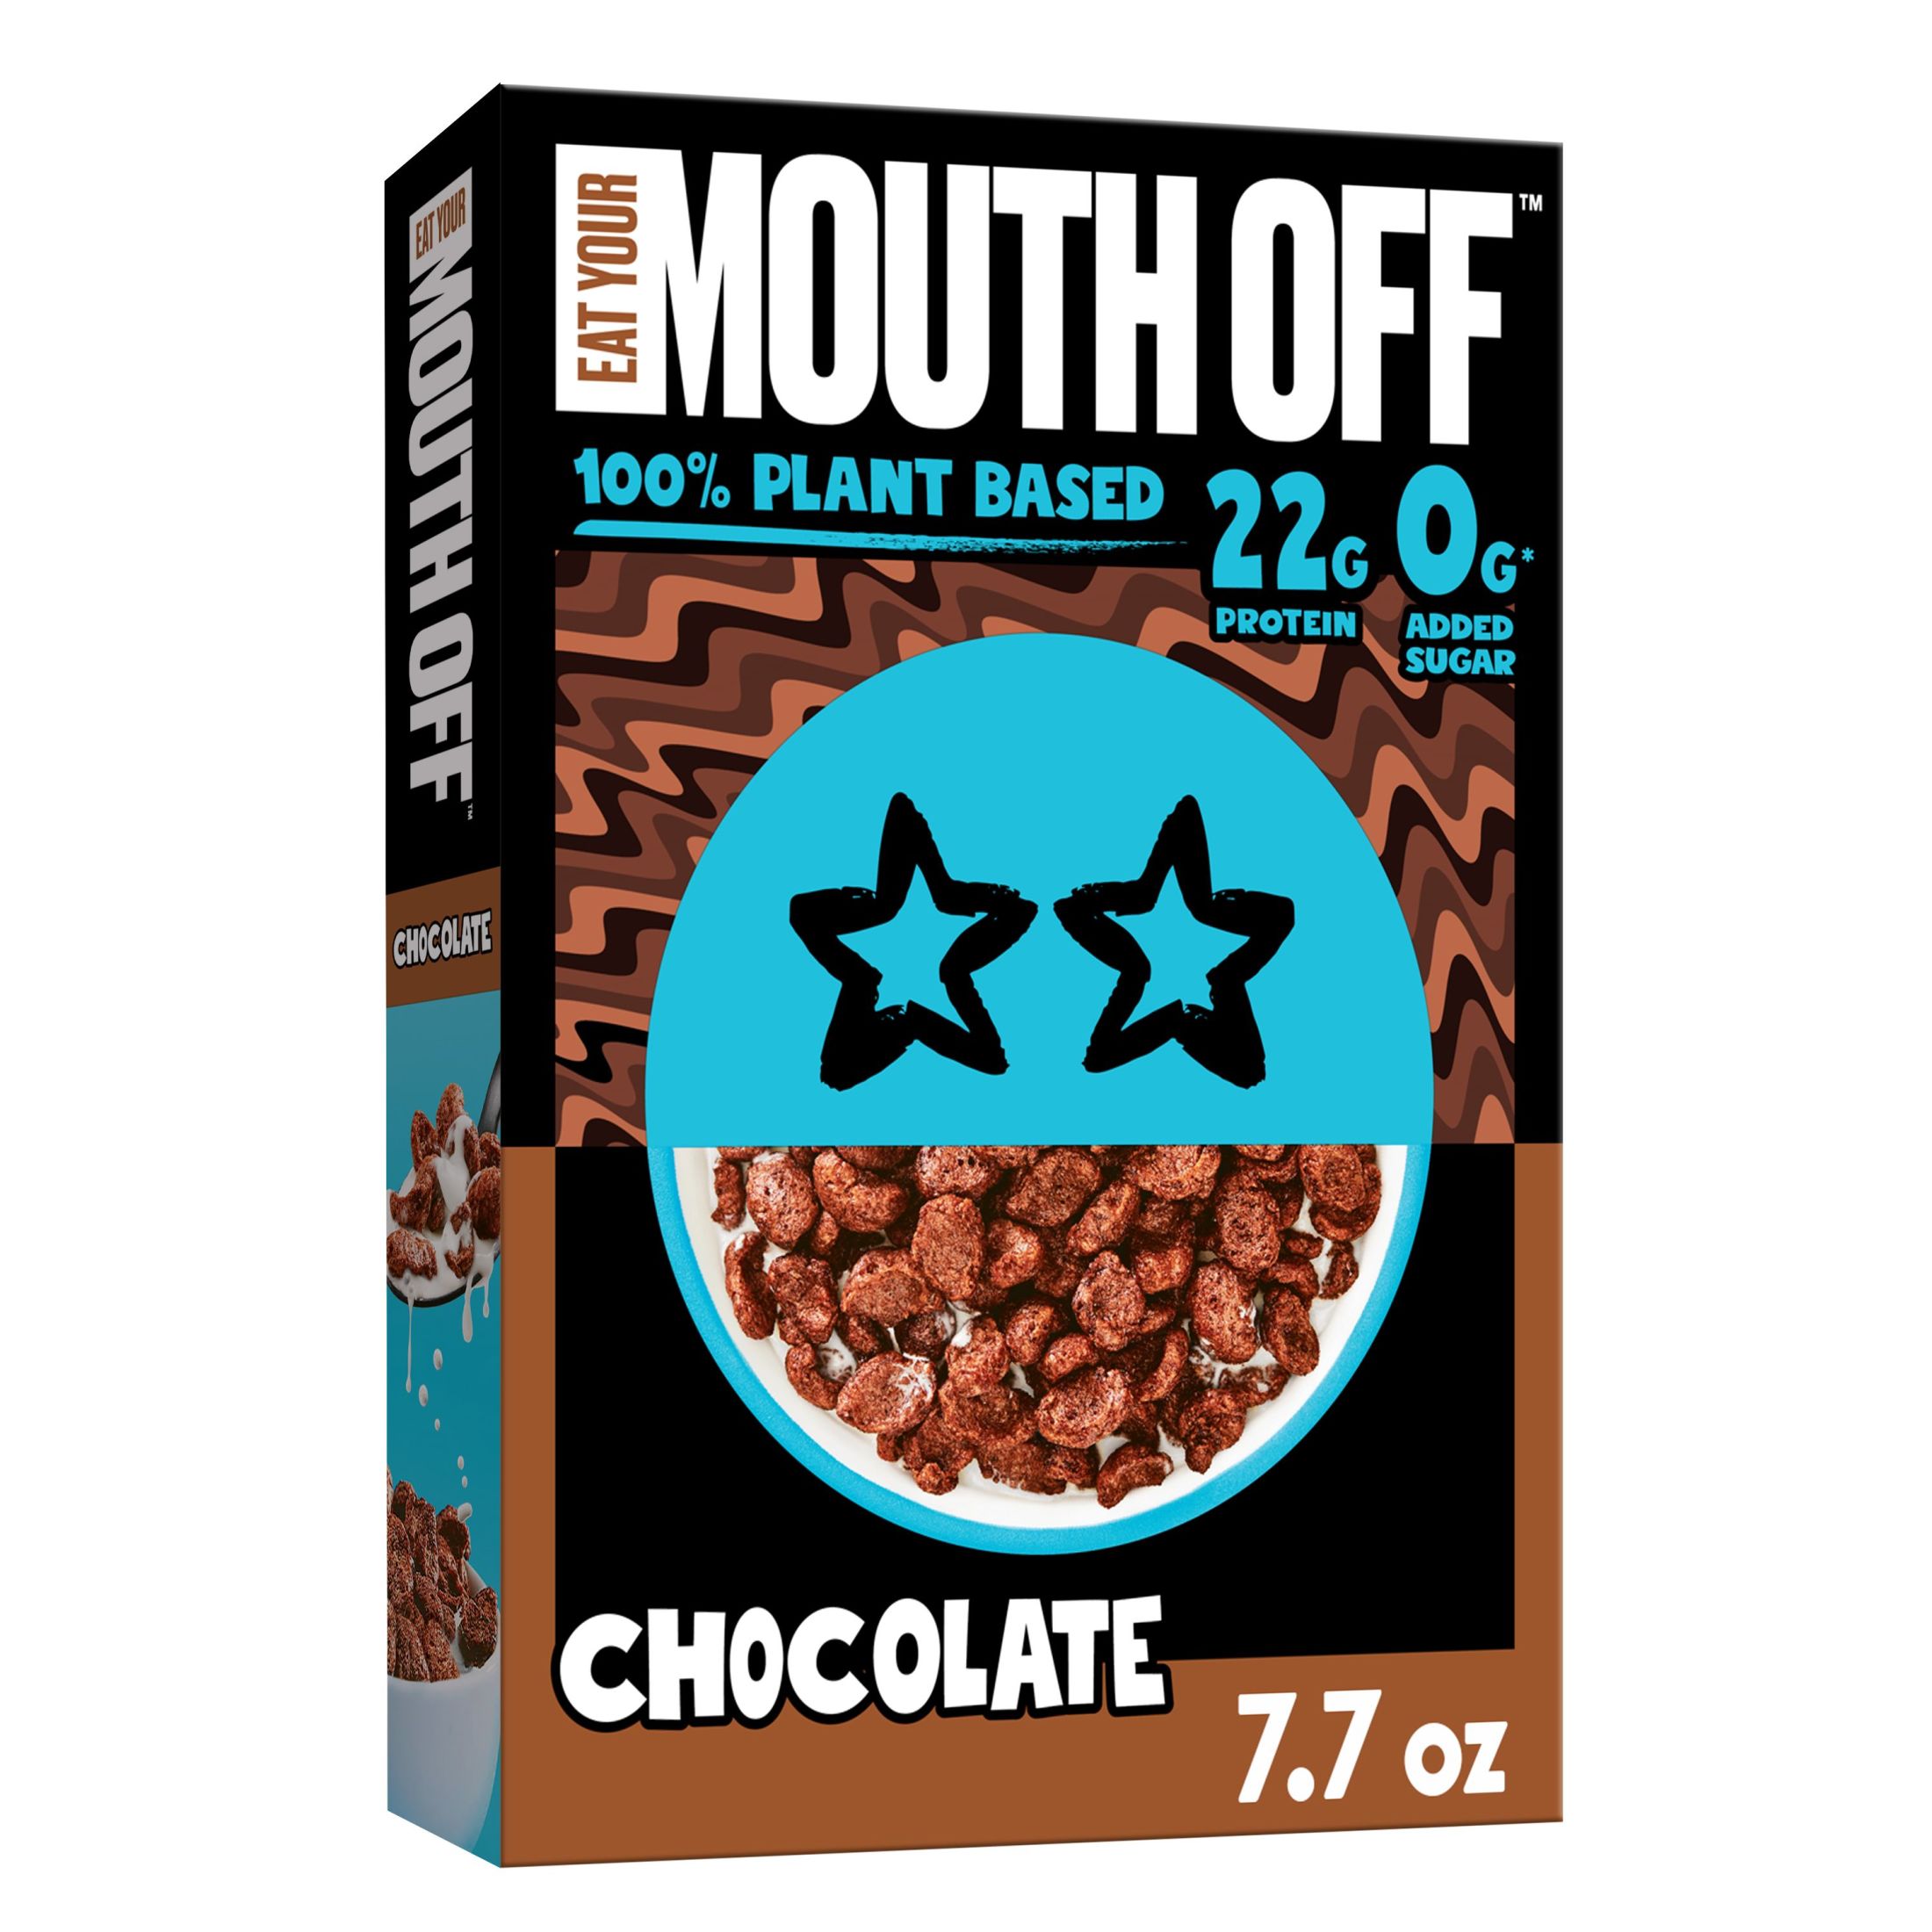 Eat Your Mouth Off Chocolate Vegan, Plant Based Protein Cereal, 22g Protein, 7.7. oz Box - image 1 of 13